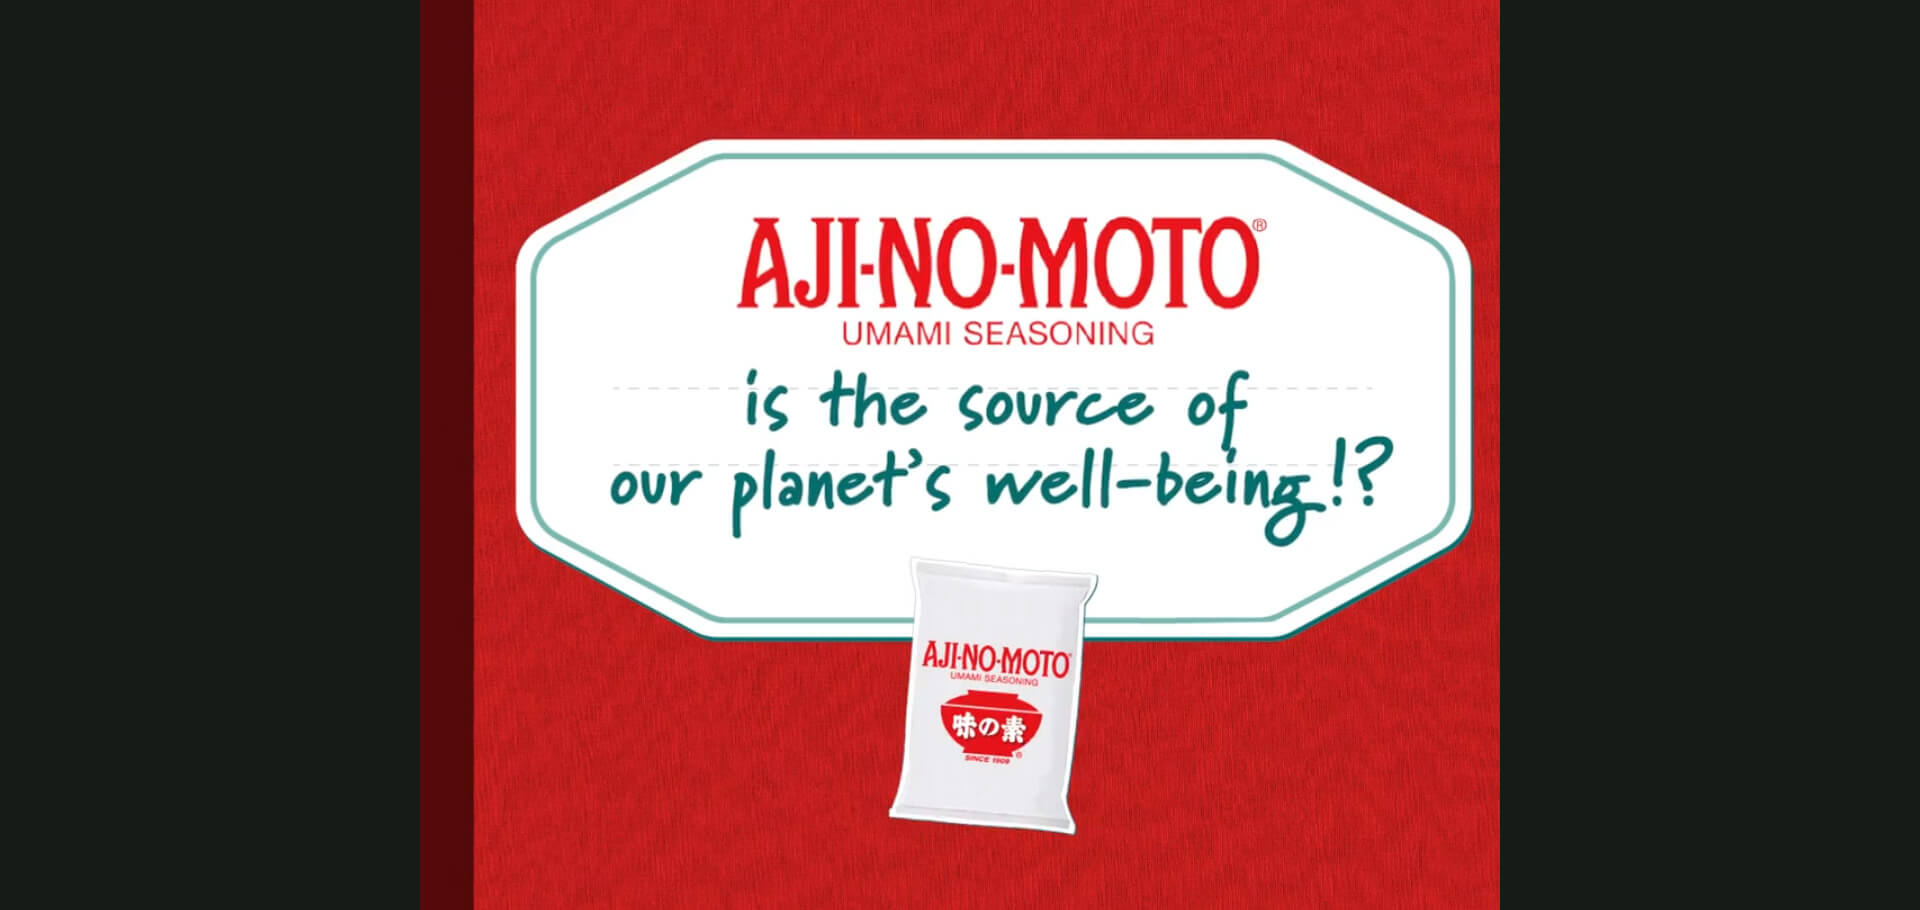 AJI-NO-MOTO®️ is the source of our planet’s well-being!?